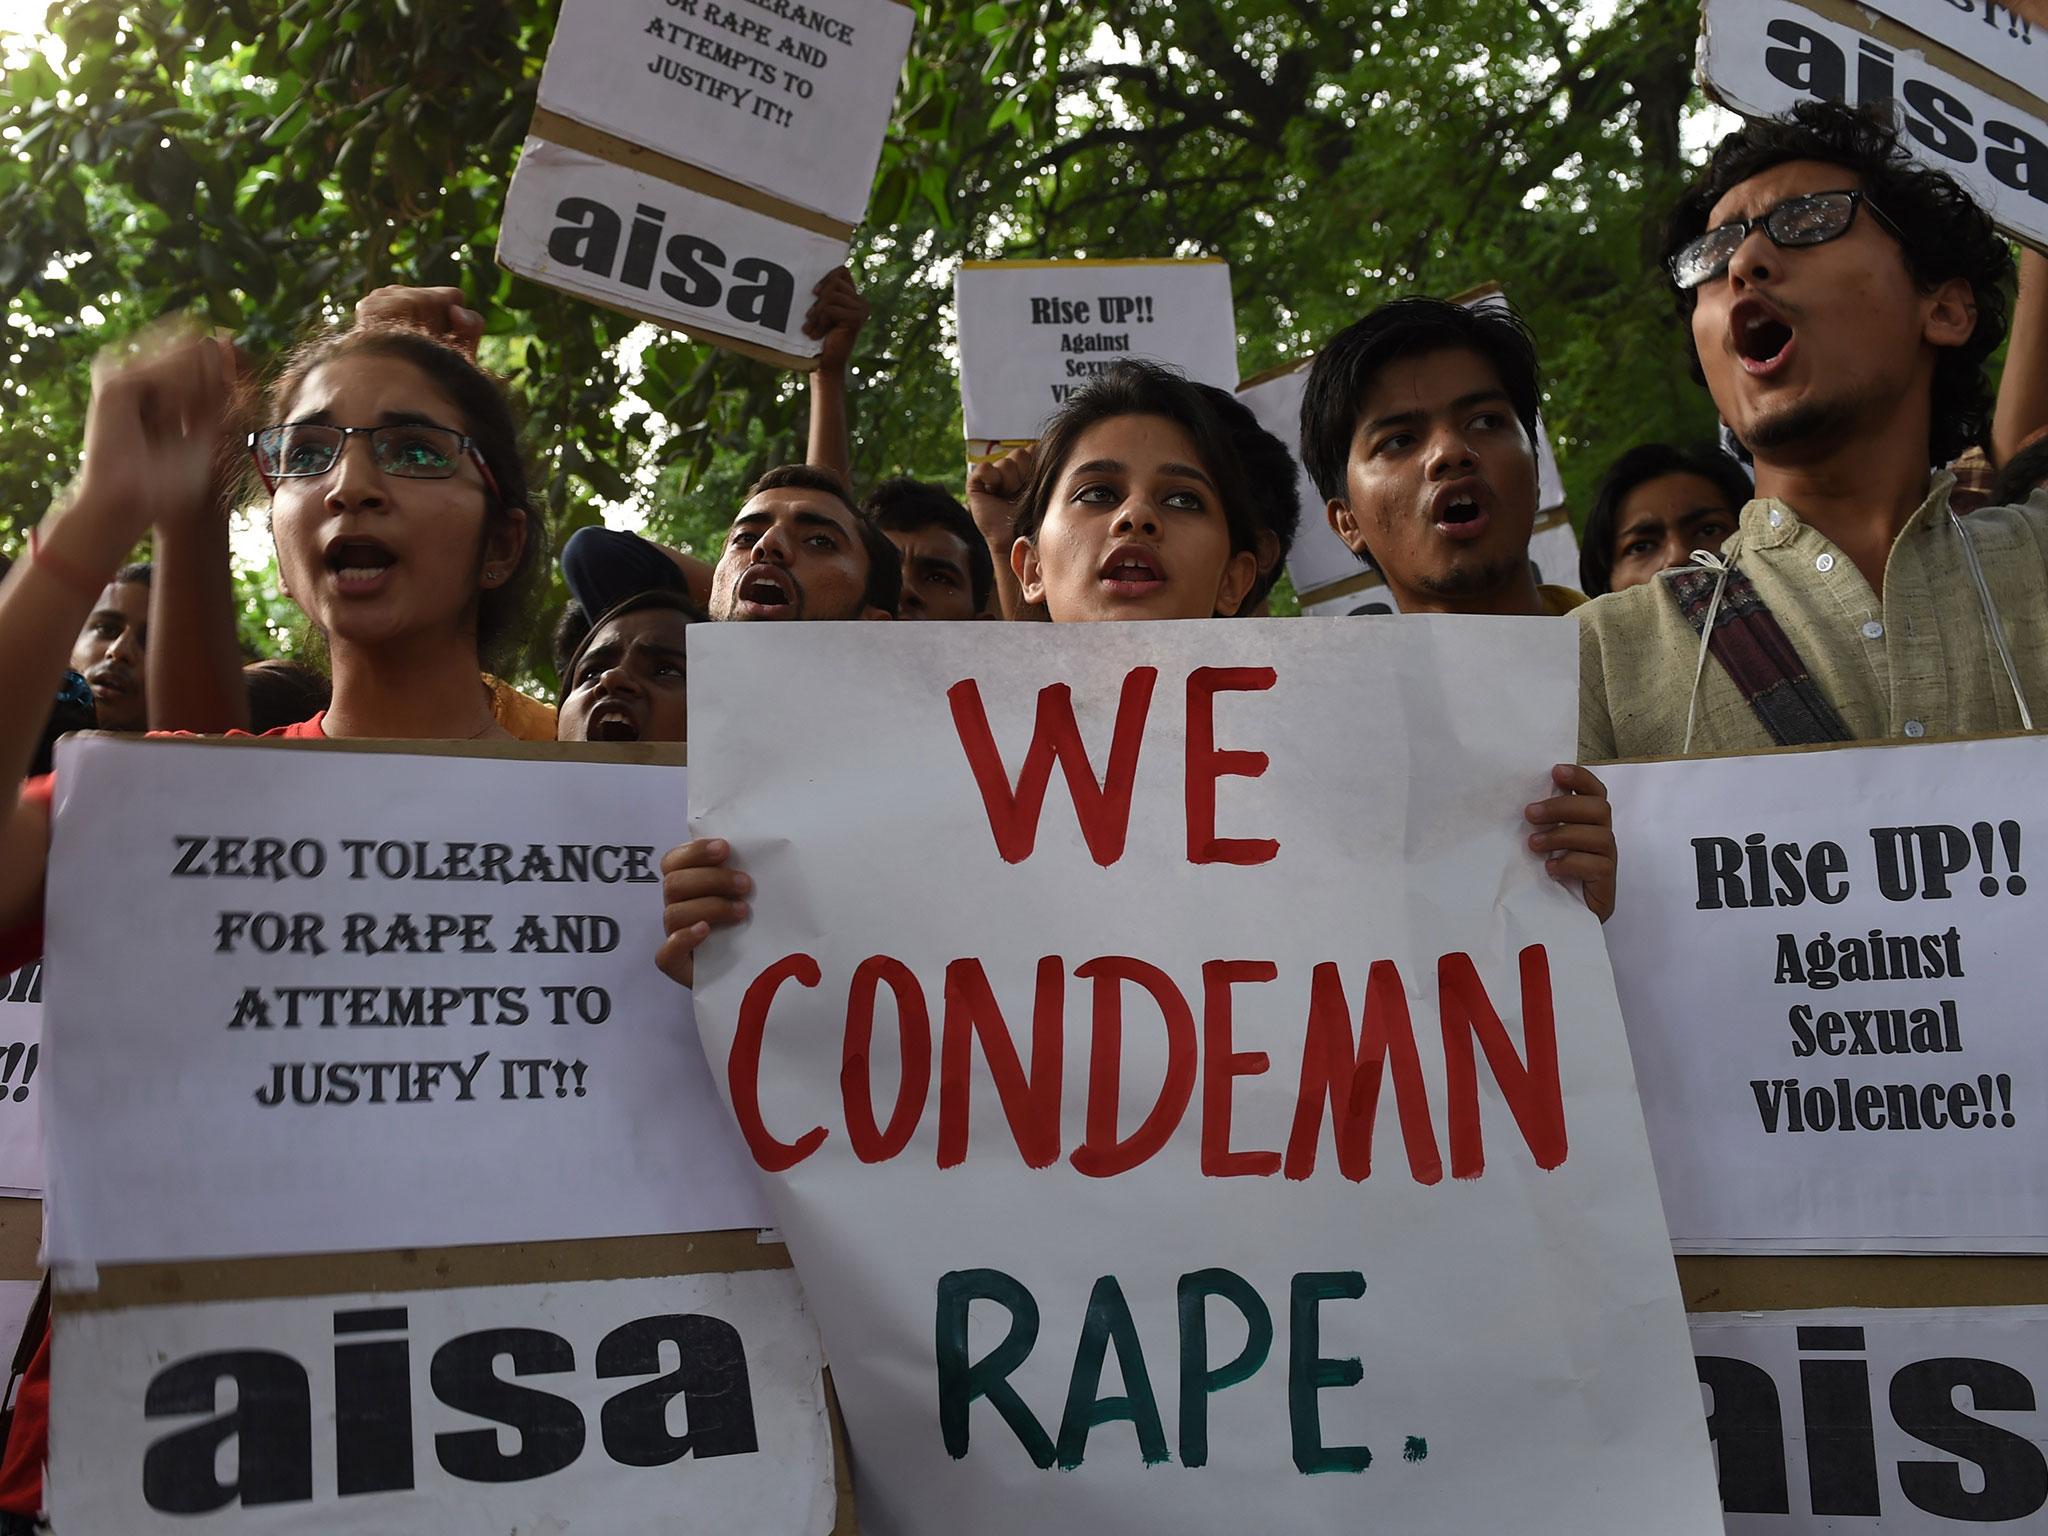 Outdoor Kannada Rape One By One Gang - Gang rape' of student prompts arrests after video causes outcry in ...